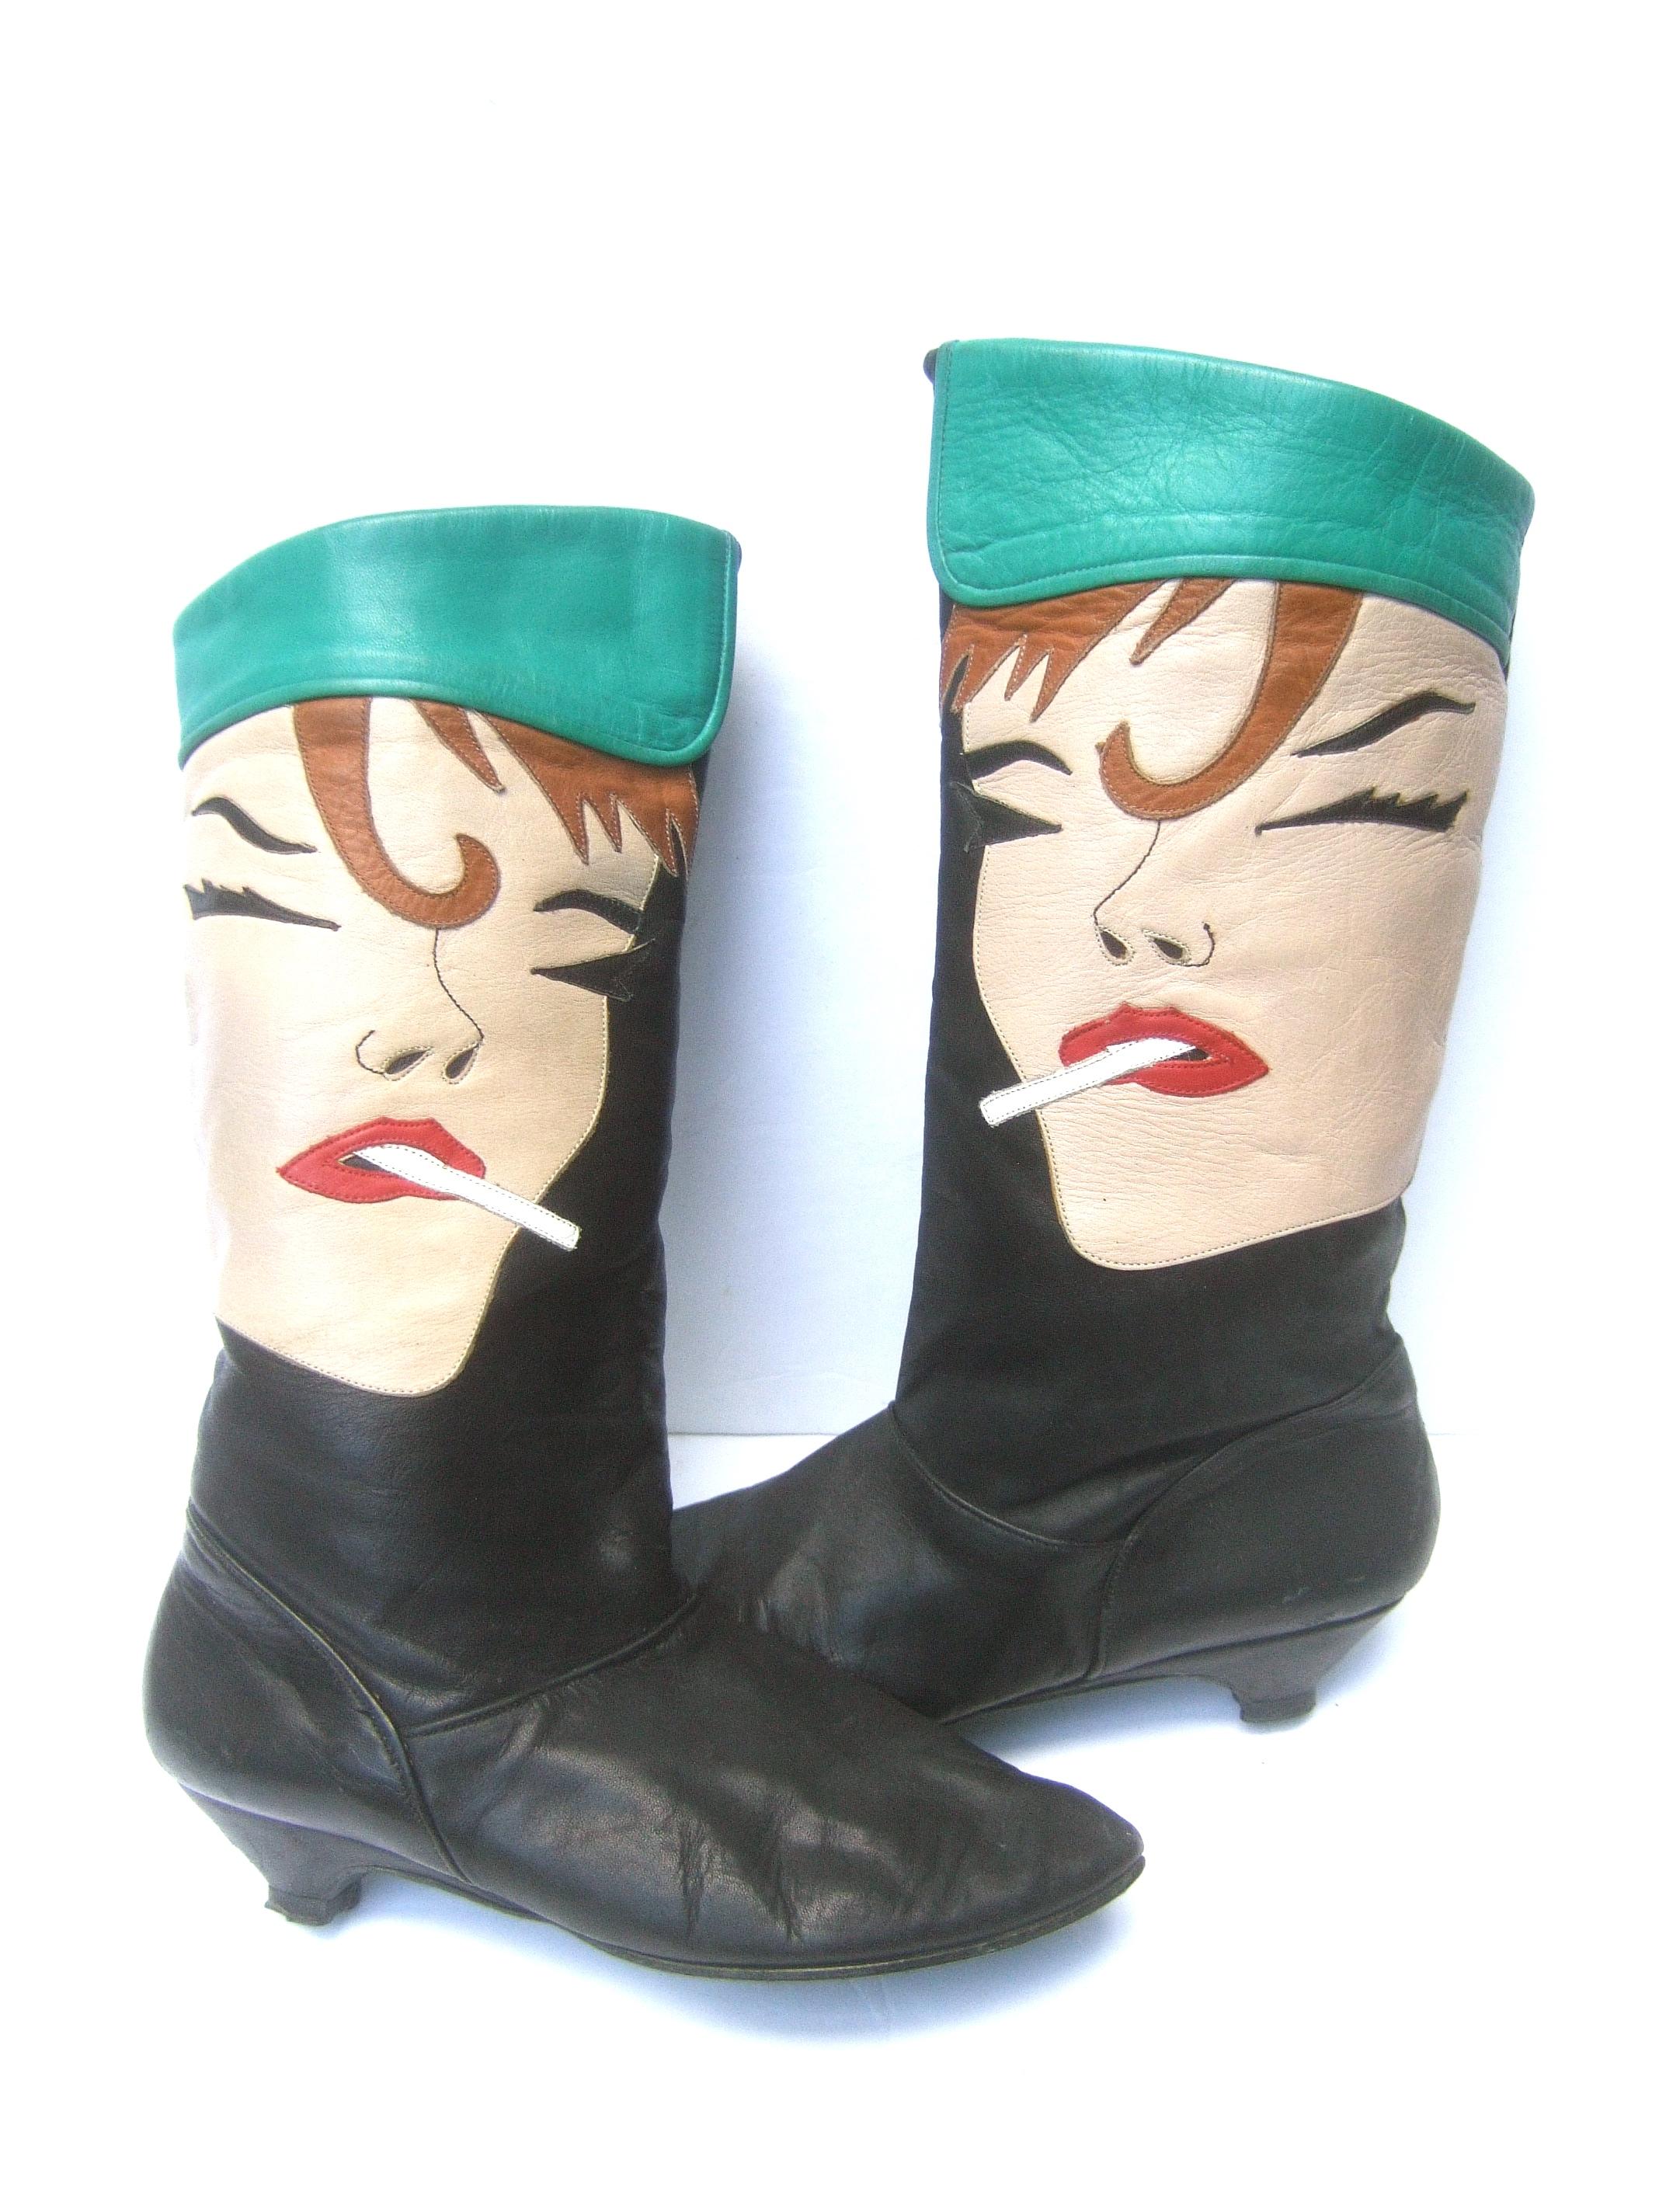 Mod Edgy Pop Art Leather Boots Designed by Zalo c 1980s 11